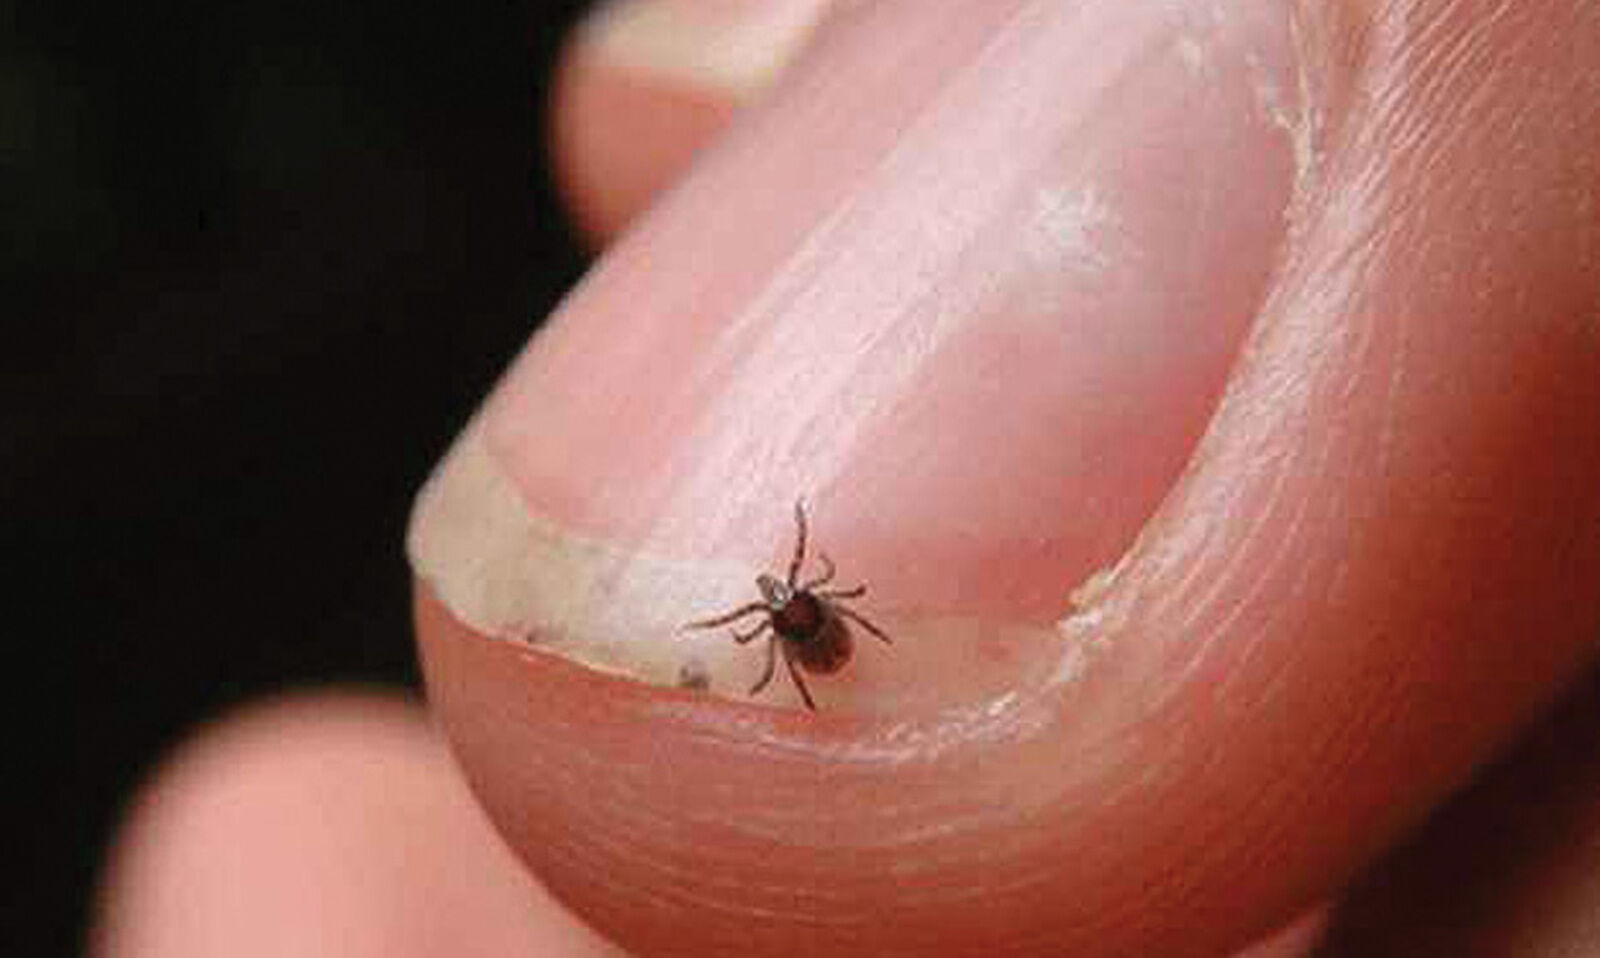 What is Scrub Typhus? Is it really life threatening?